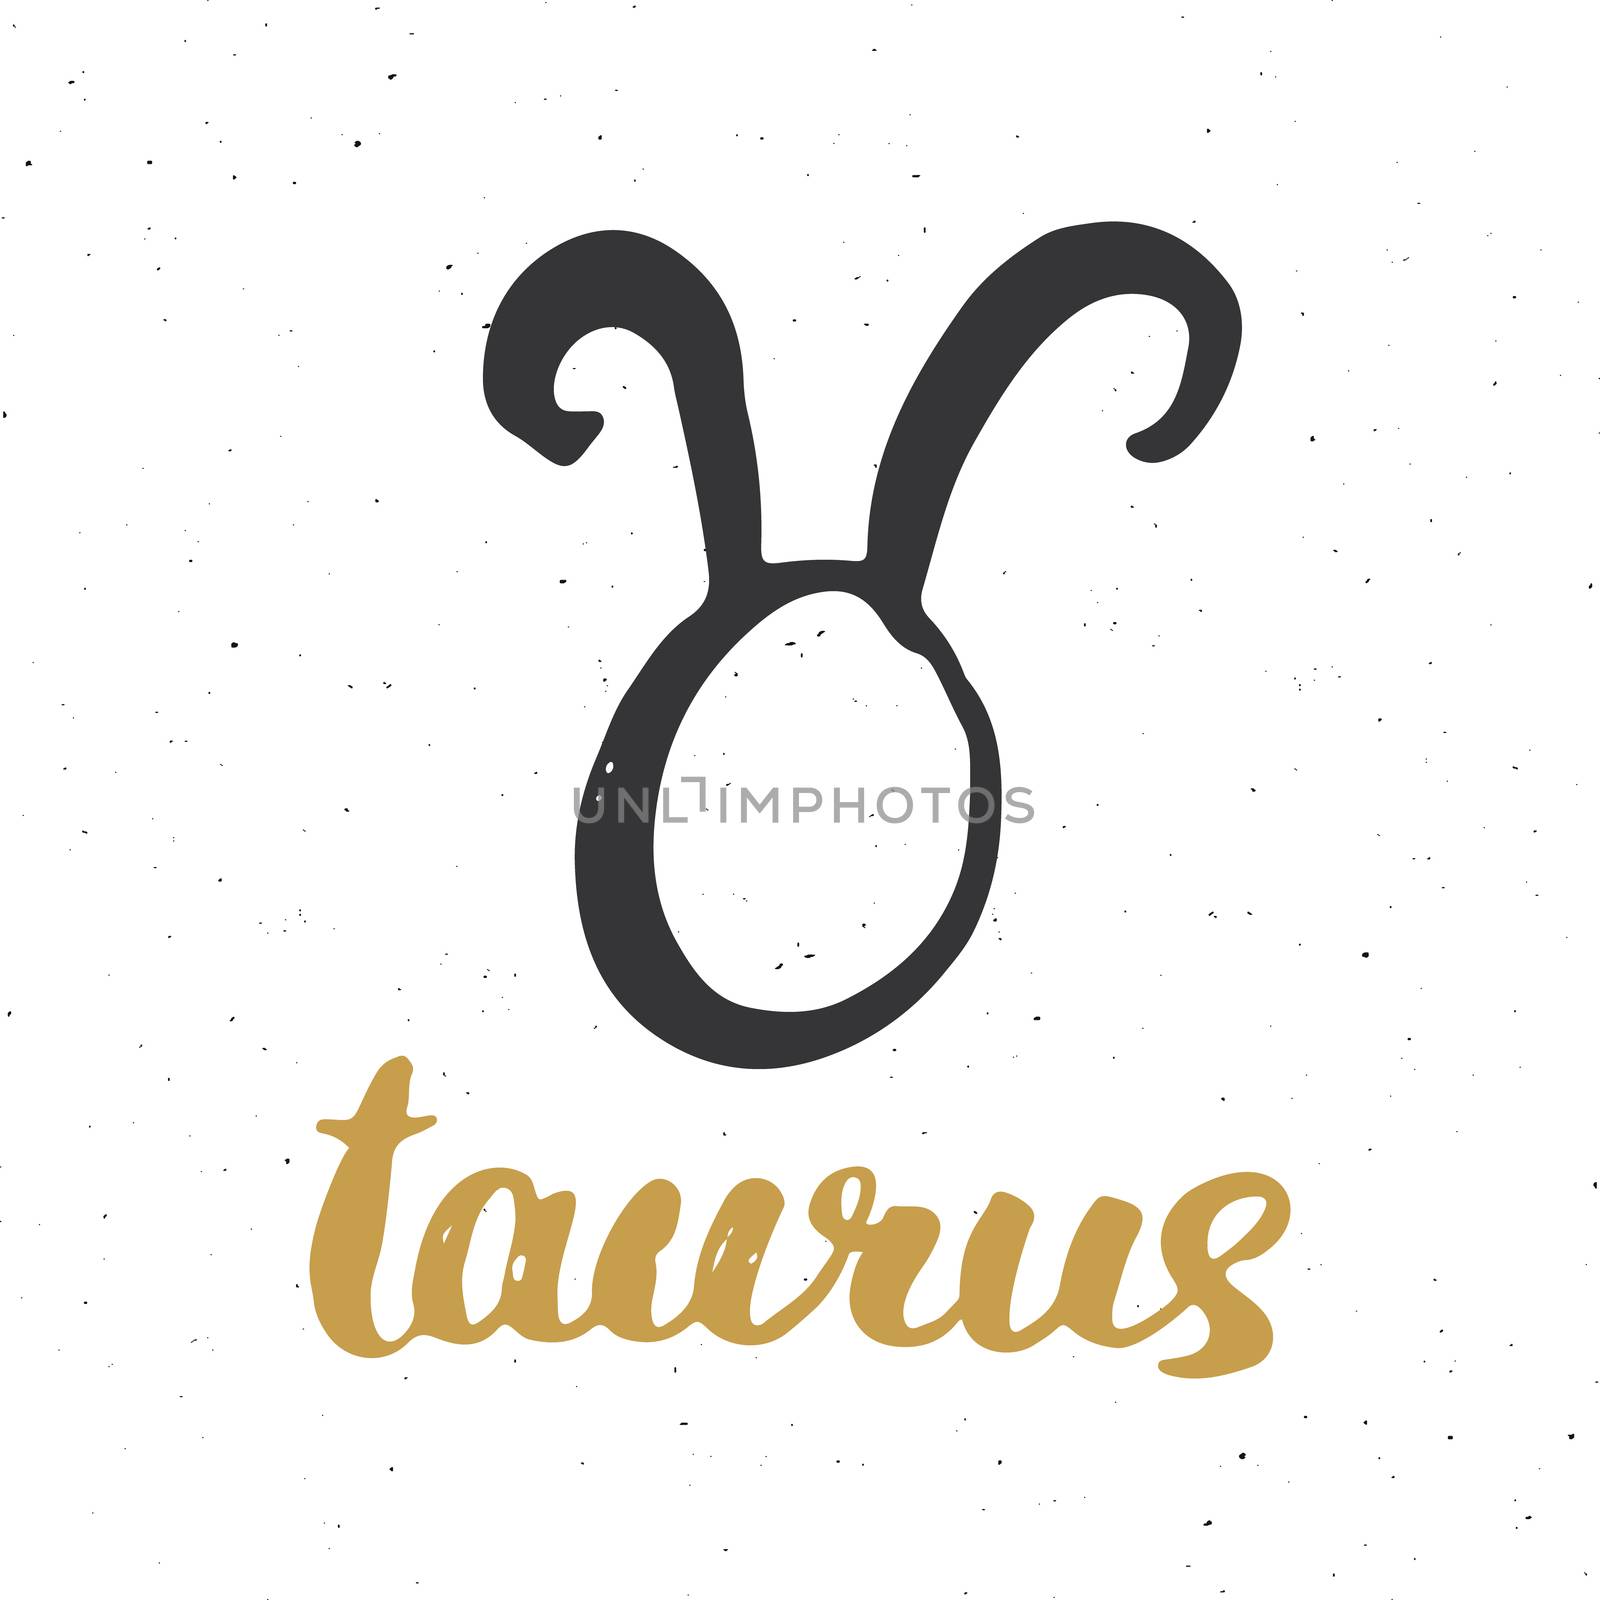 Zodiac sign Taurus and lettering. Hand drawn horoscope astrology symbol, grunge textured design, typography print, vector illustration by Lemon_workshop